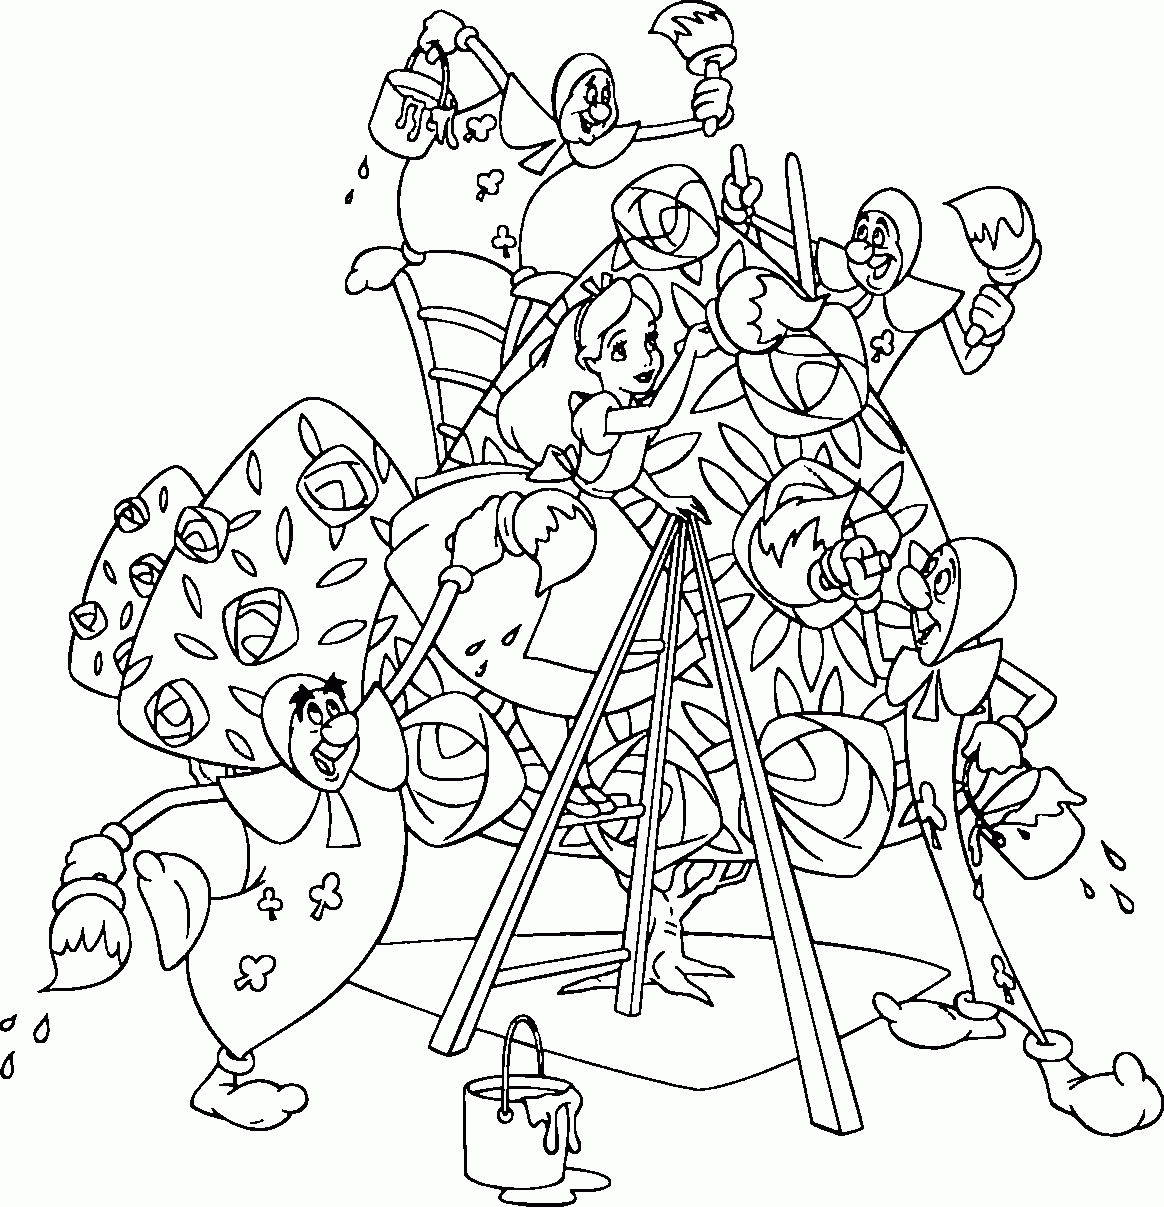 Alice In Wonderland Art Coloring Pages - Coloring Pages For All Ages